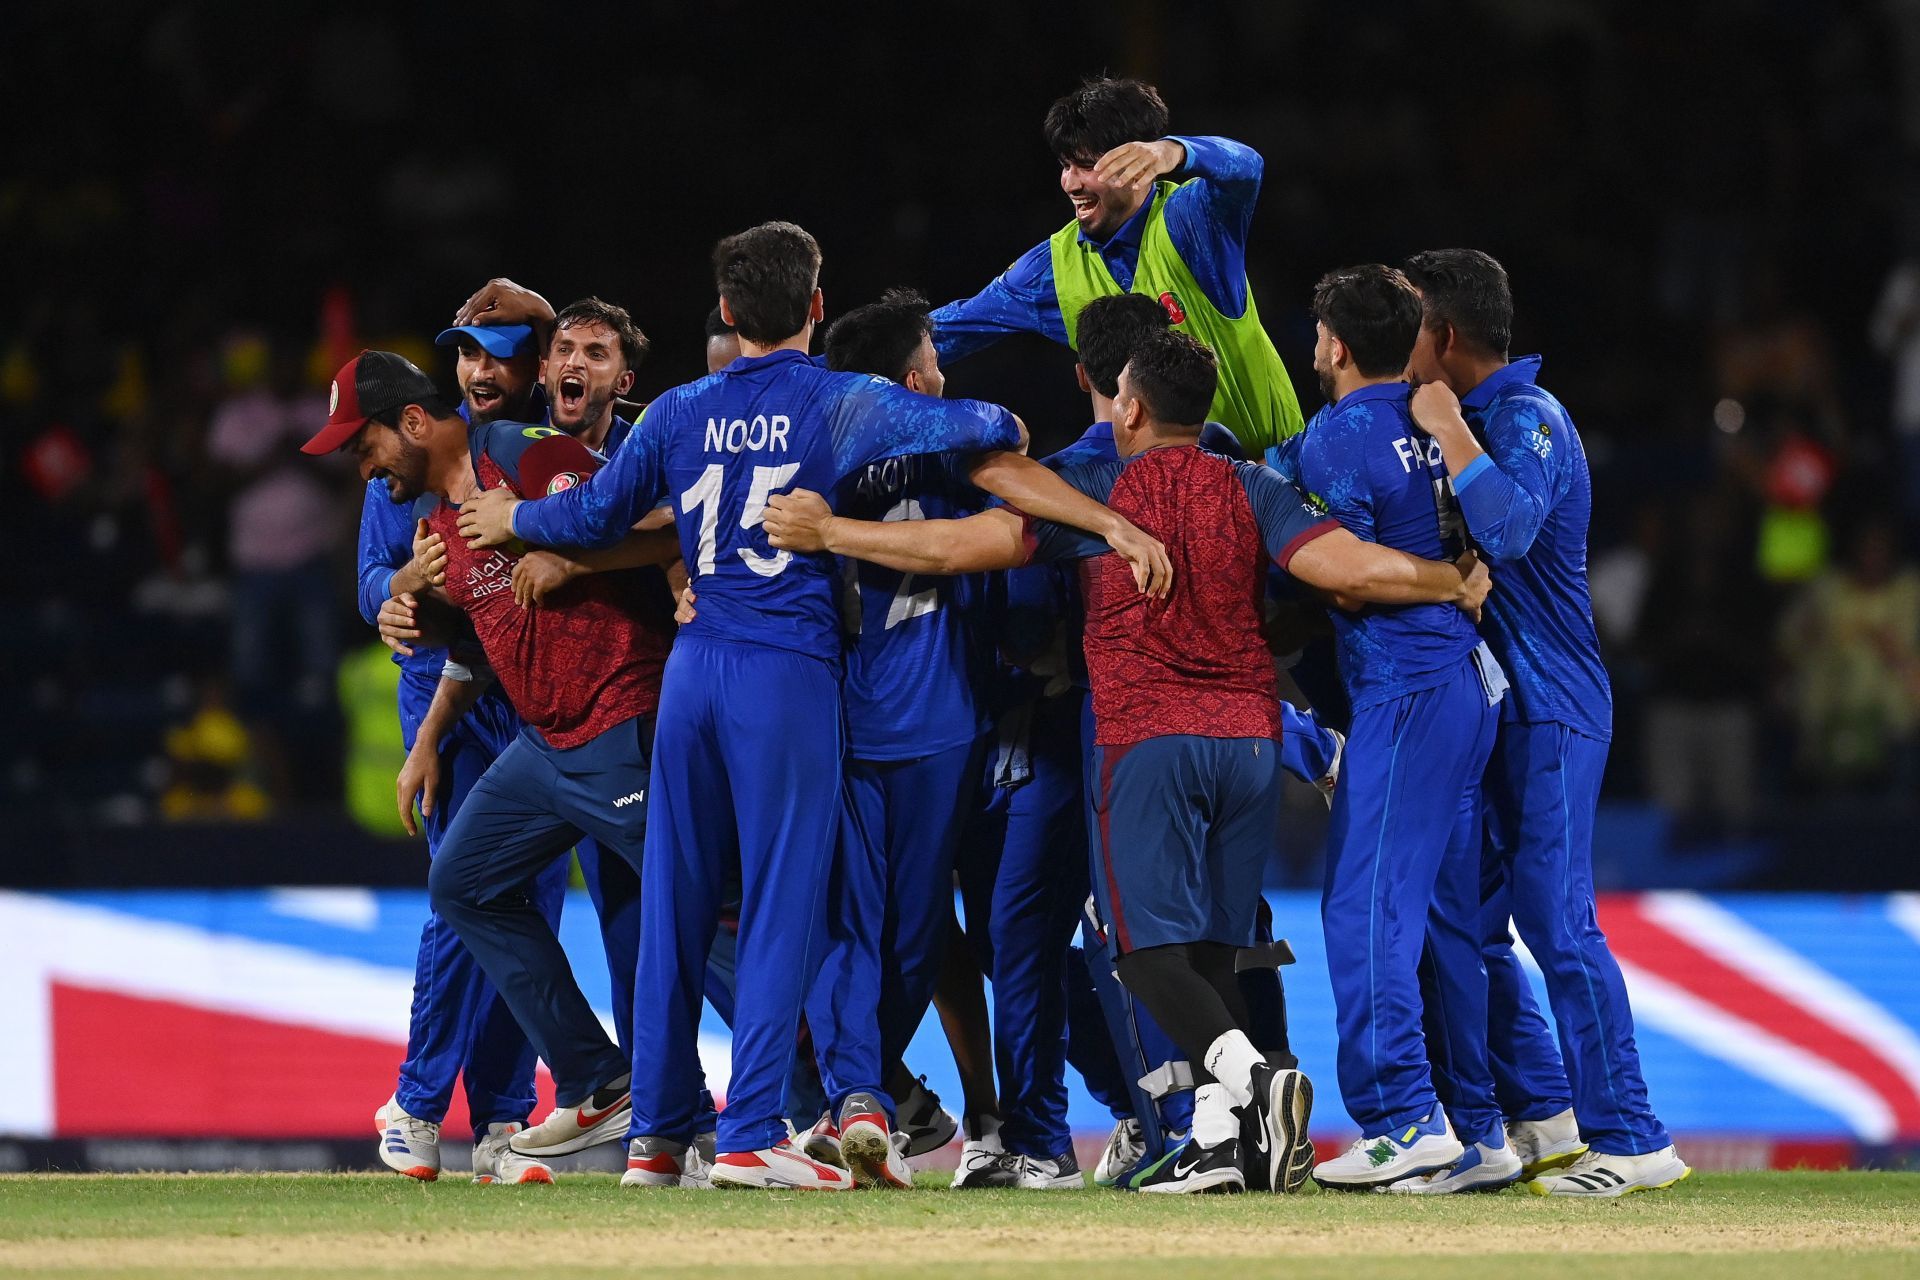 [Watch] Afghanistan players ecstatic in the dressing room after